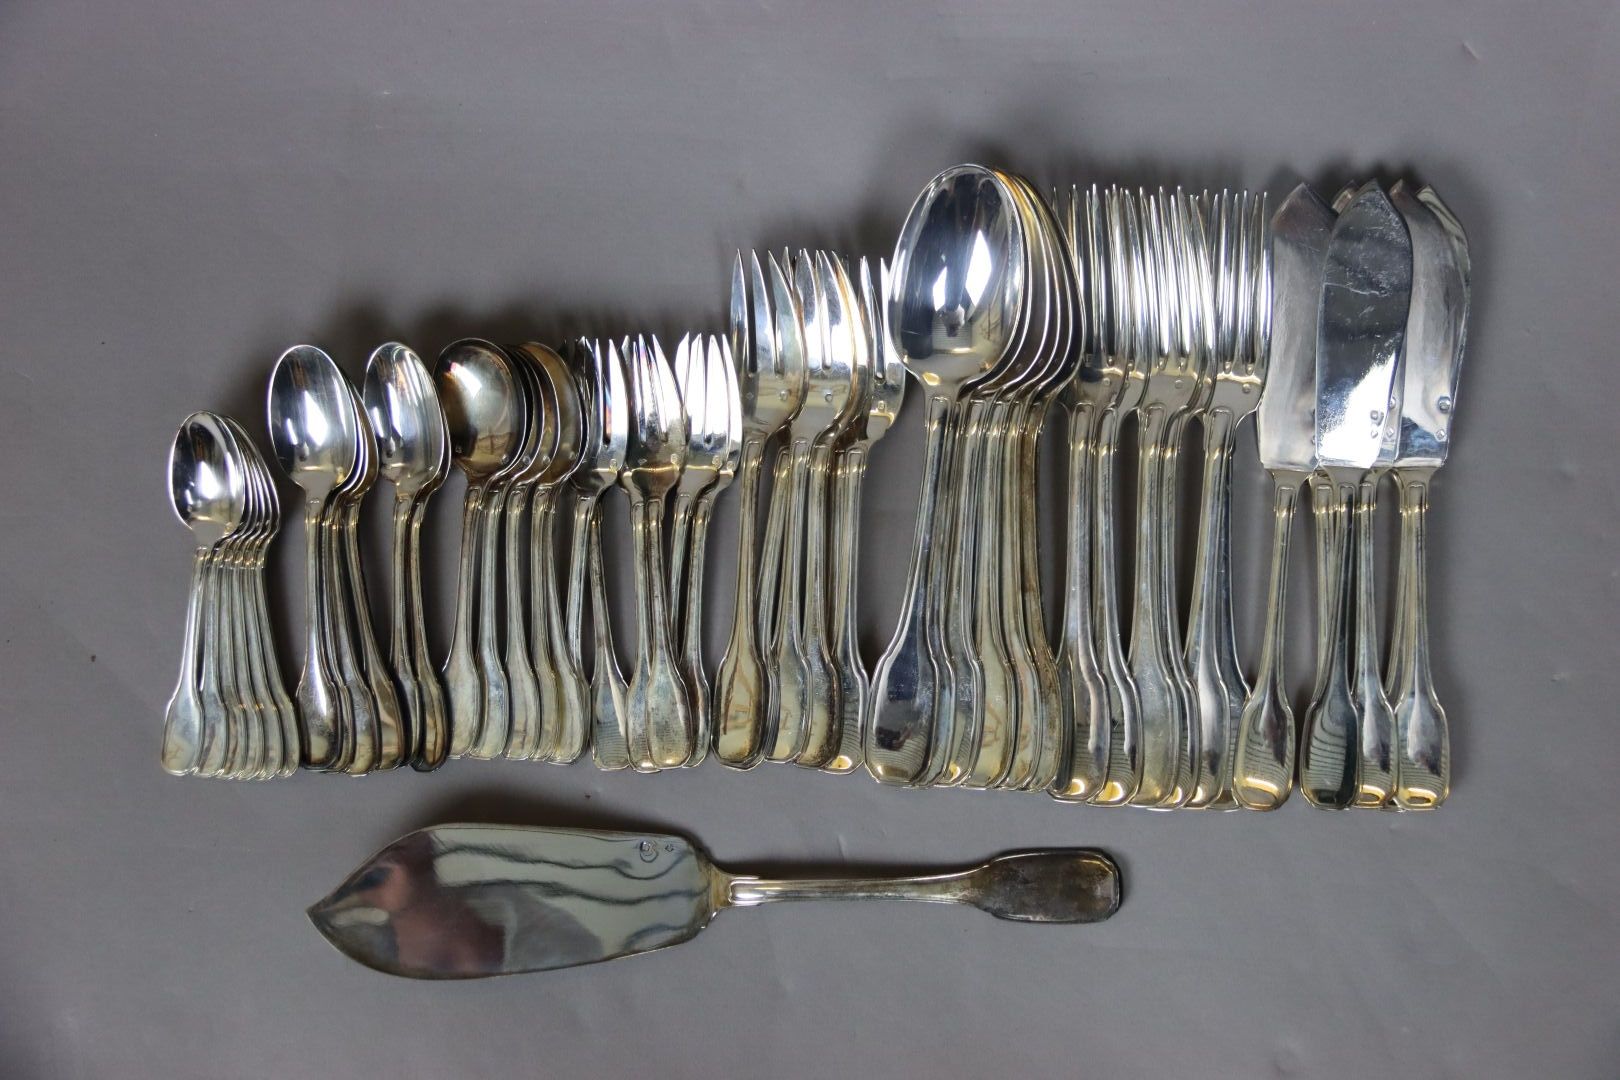 Null SILVER. Meeting of silver cutlery hallmark minerve including :

6 small spo&hellip;